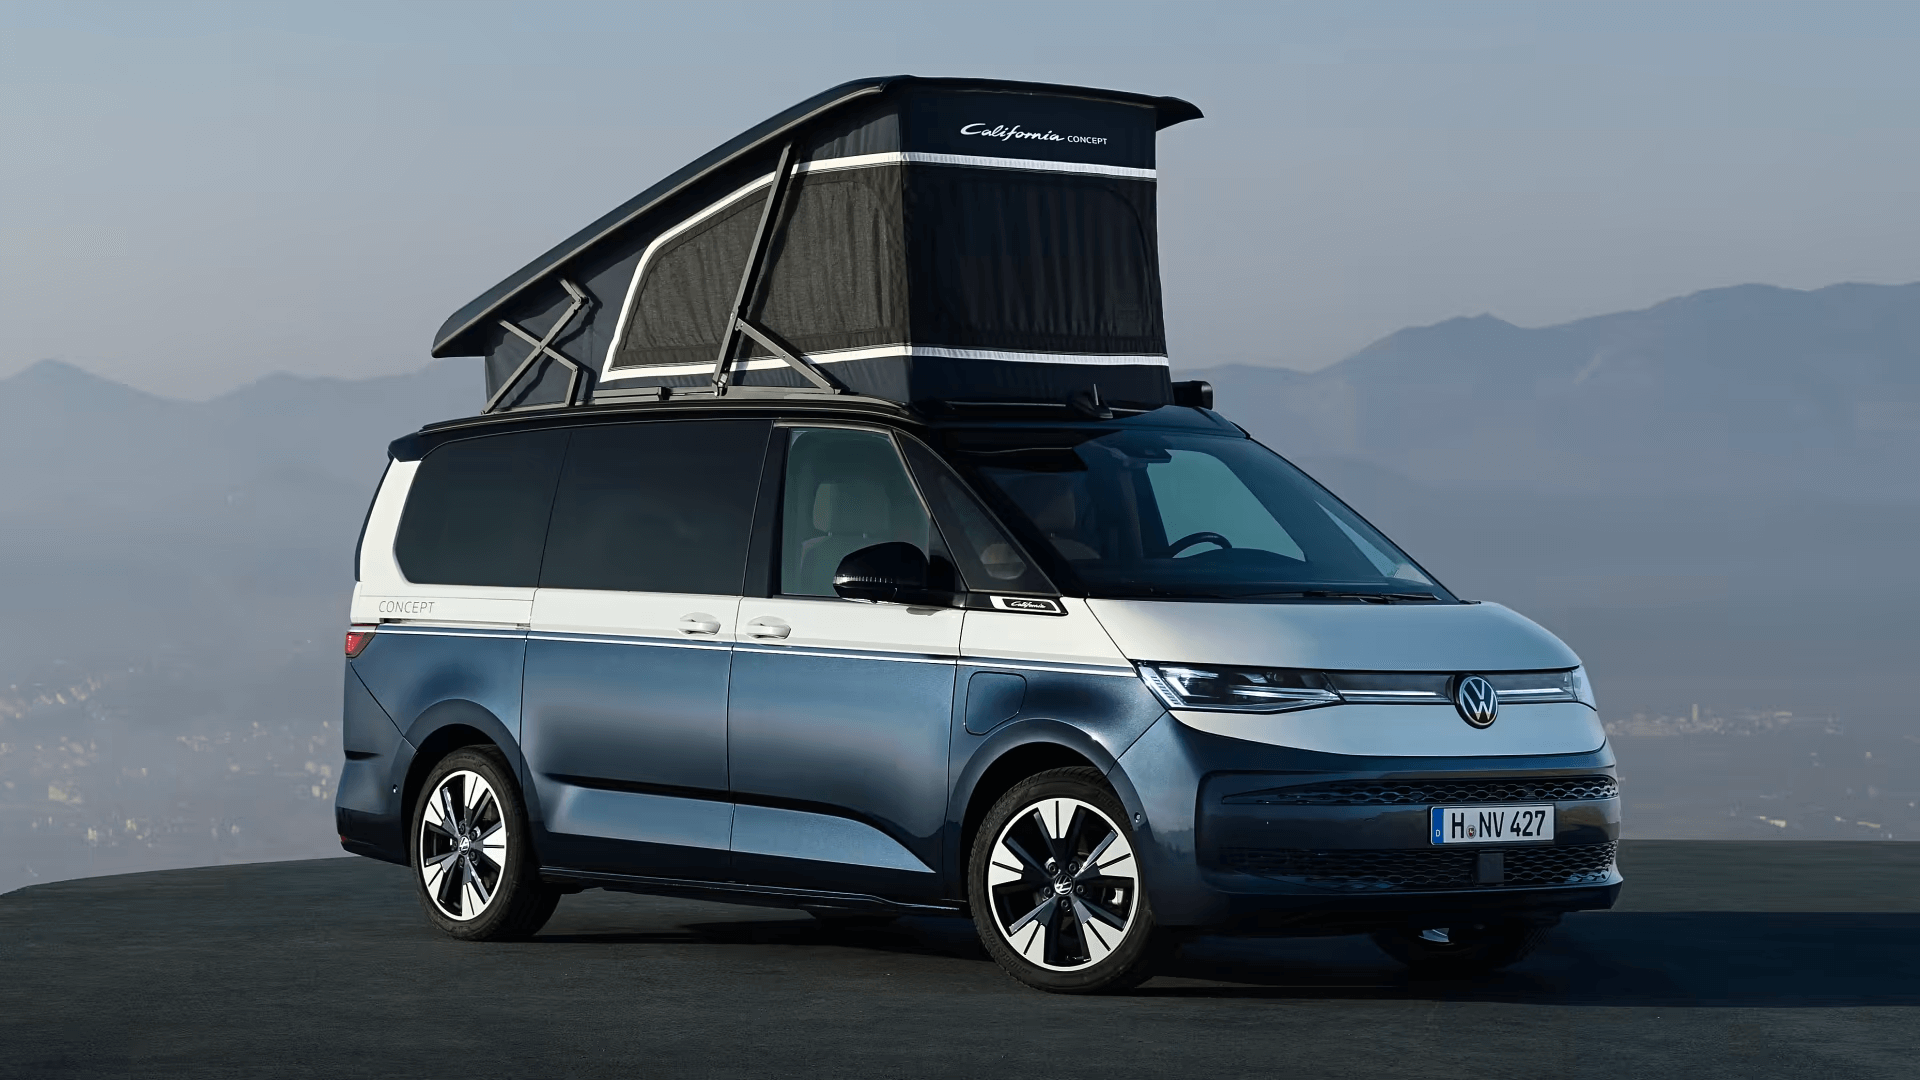 Top car camping vehicles for stargazing - Carvana Blog